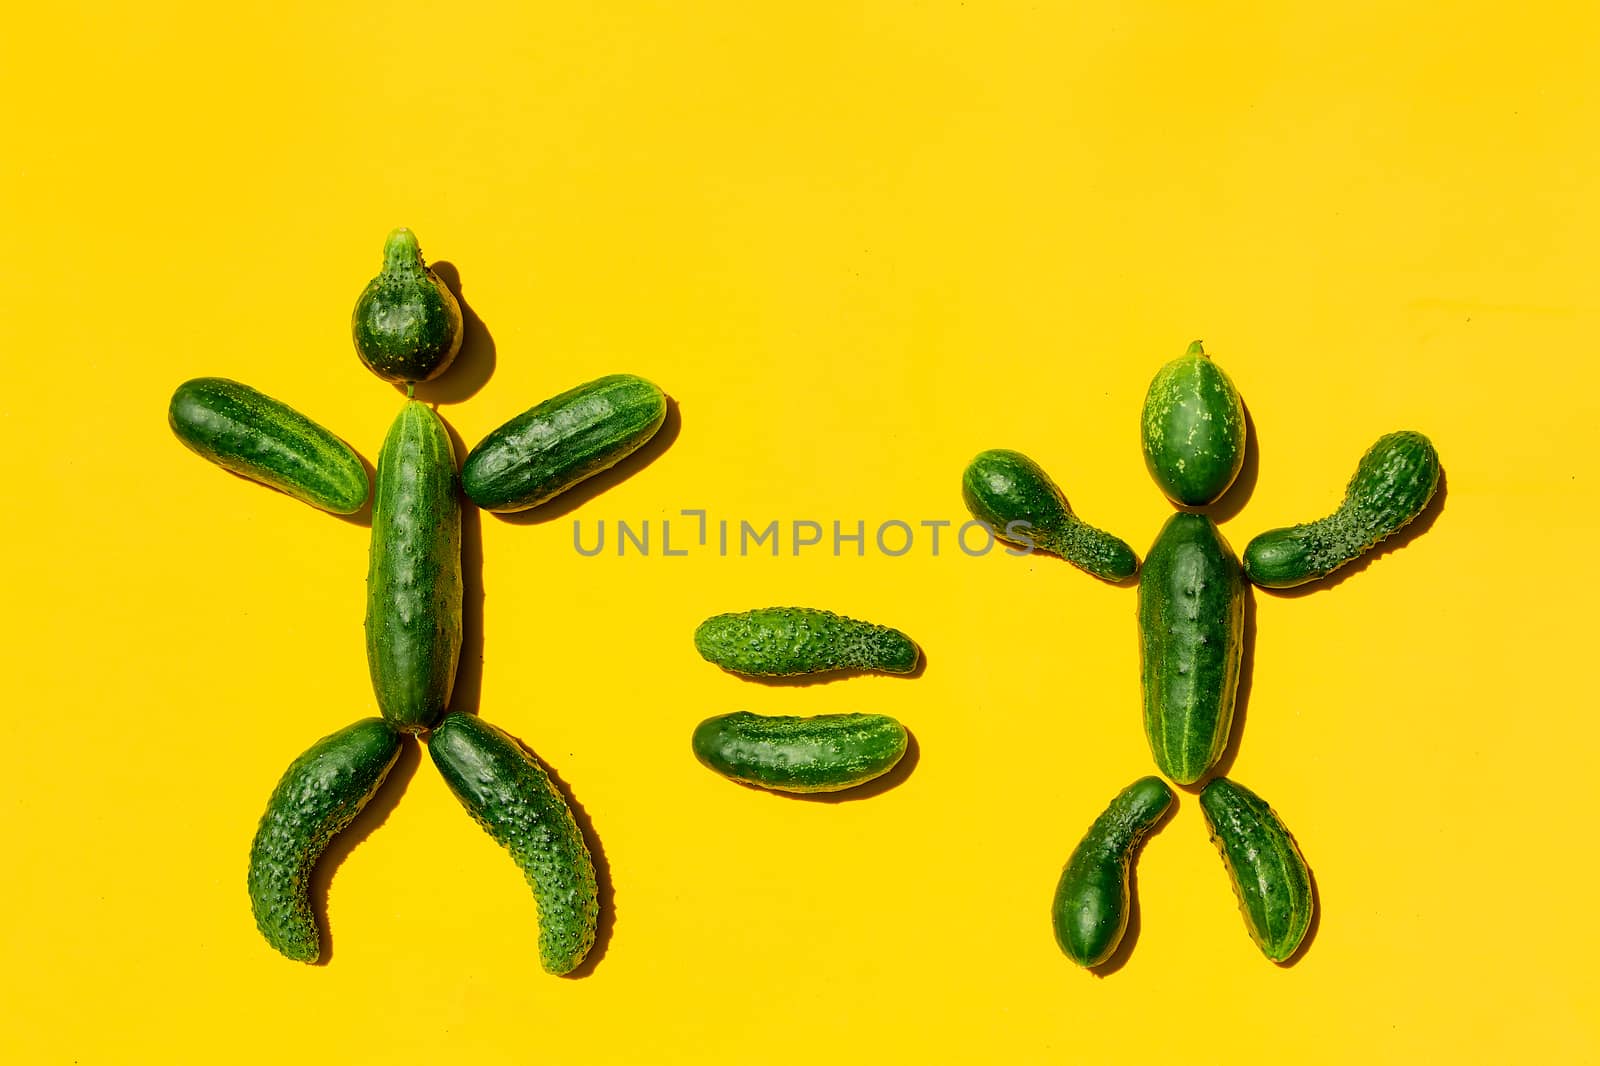 People equality diversity concept on a yellow background. Copy space. Cucumbers for designers. Top view. Cucumber harvest. Cucumber men. Figure of men made from cucumbers. Farming harvesting concept.